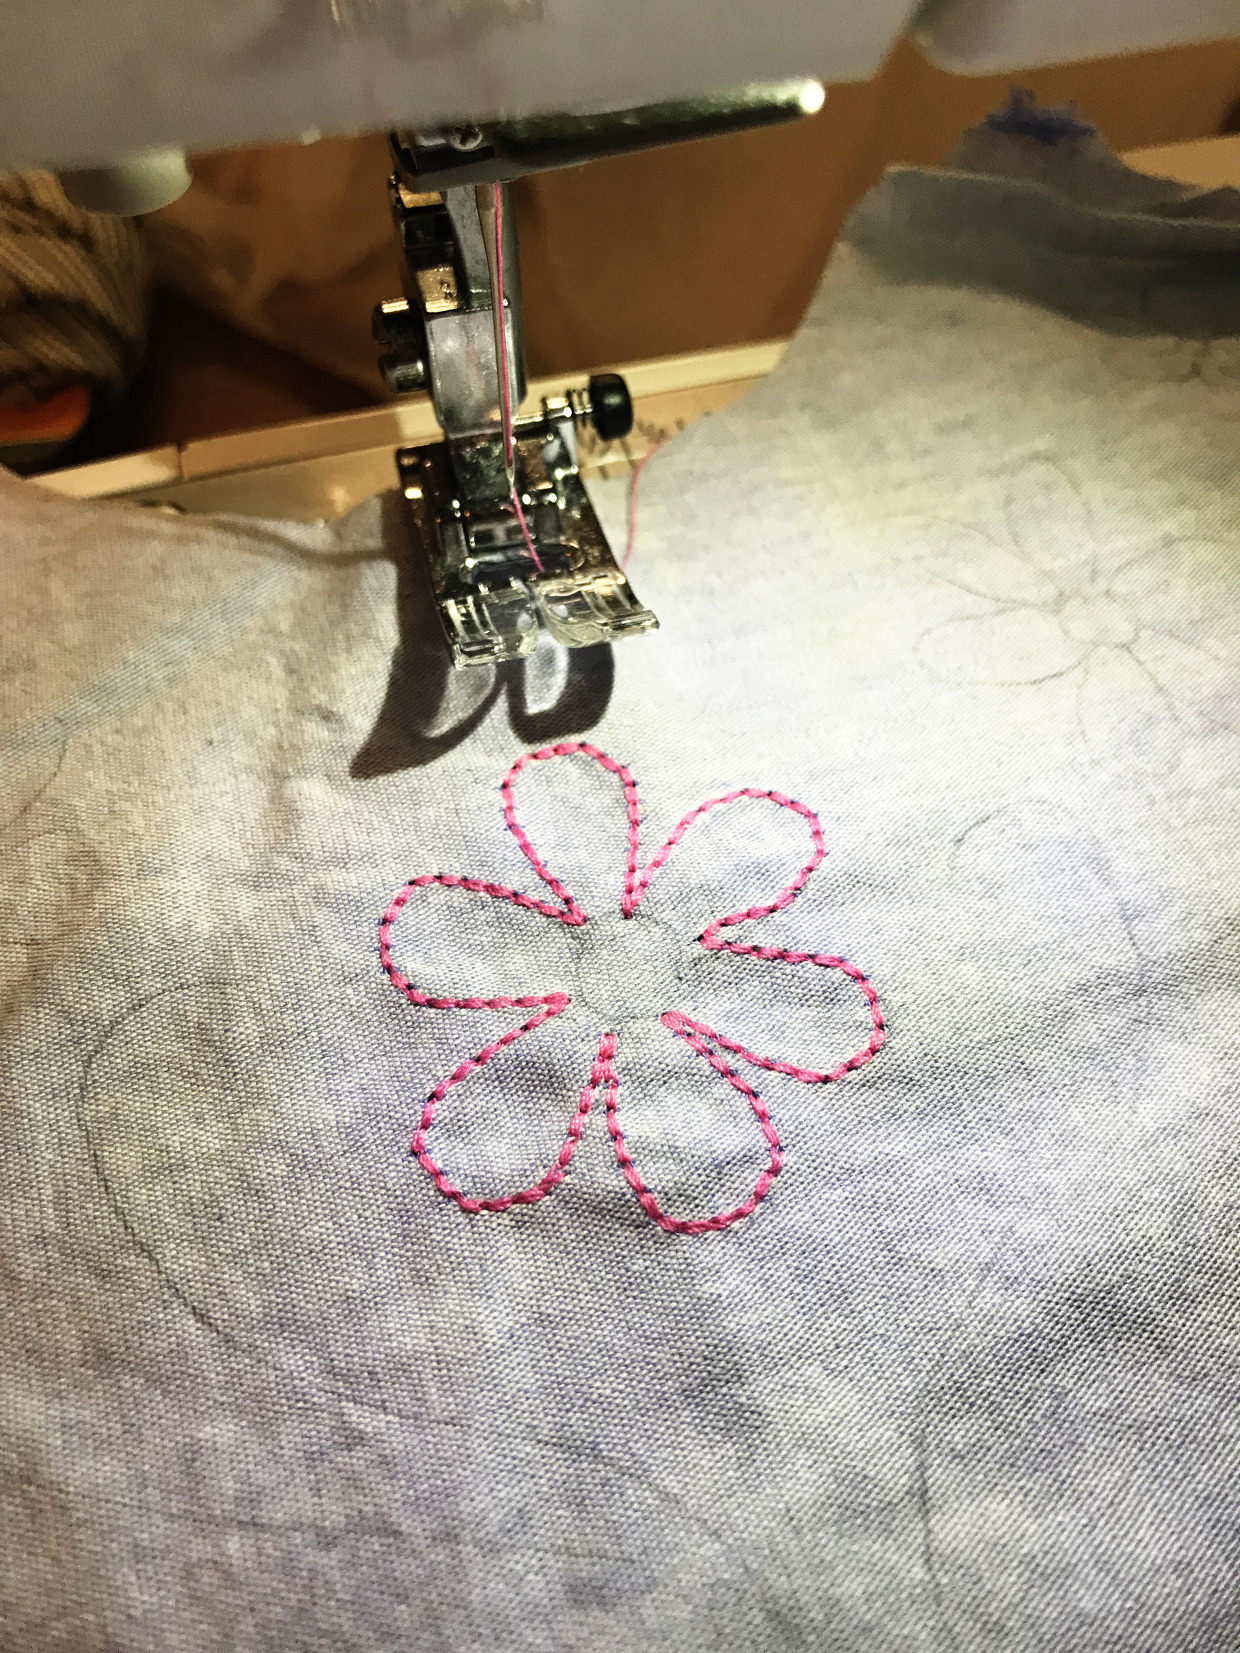 Saturday Sewing: Machine Appliqué with the look of Hand Stitching